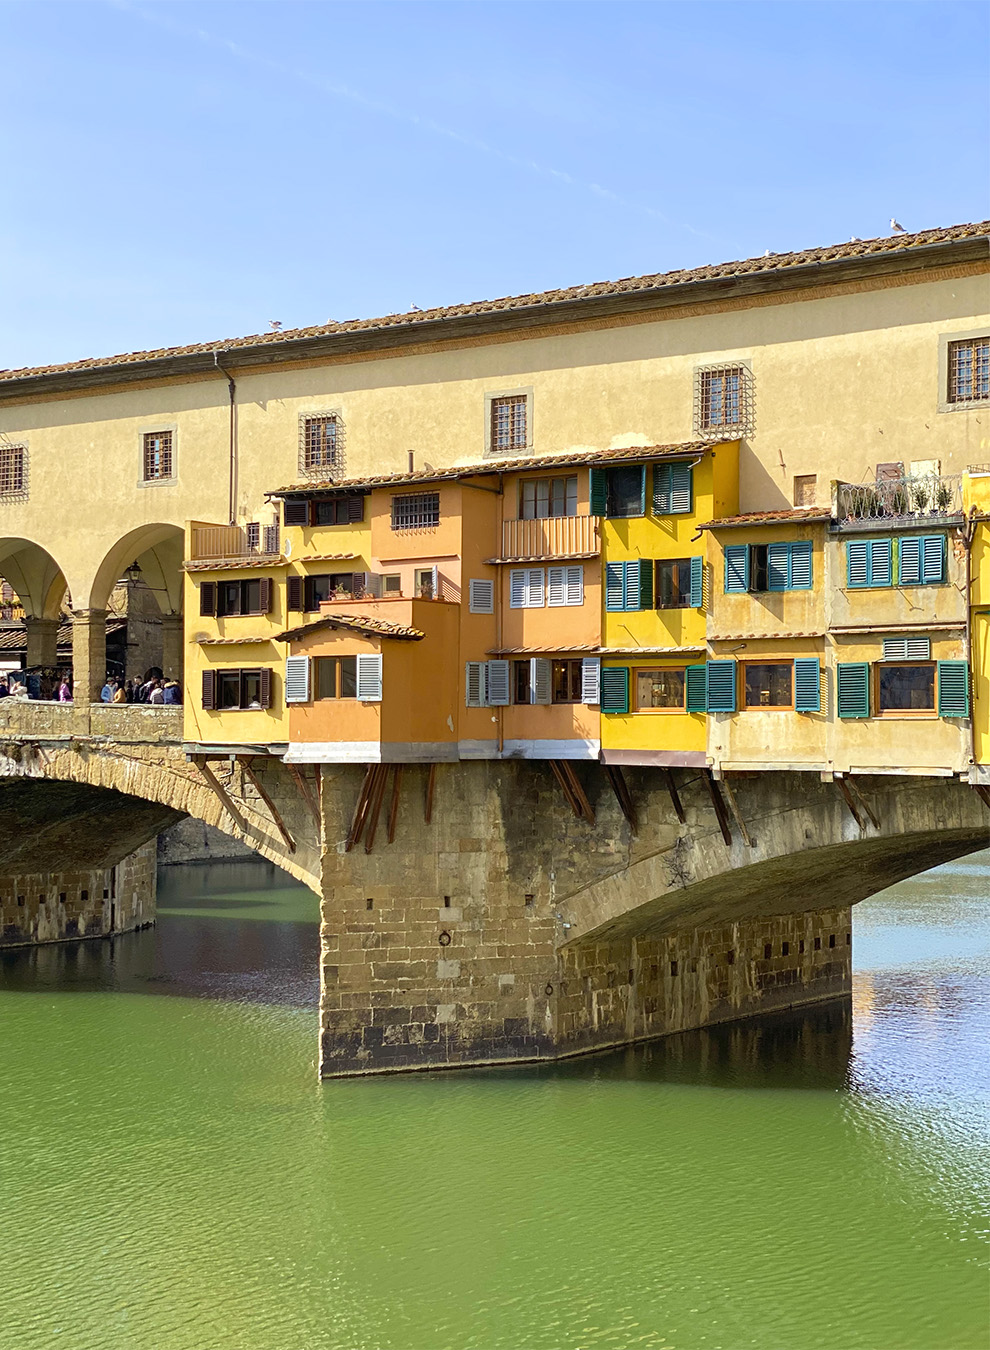 The world wide famous Ponte Vecchio in Florence